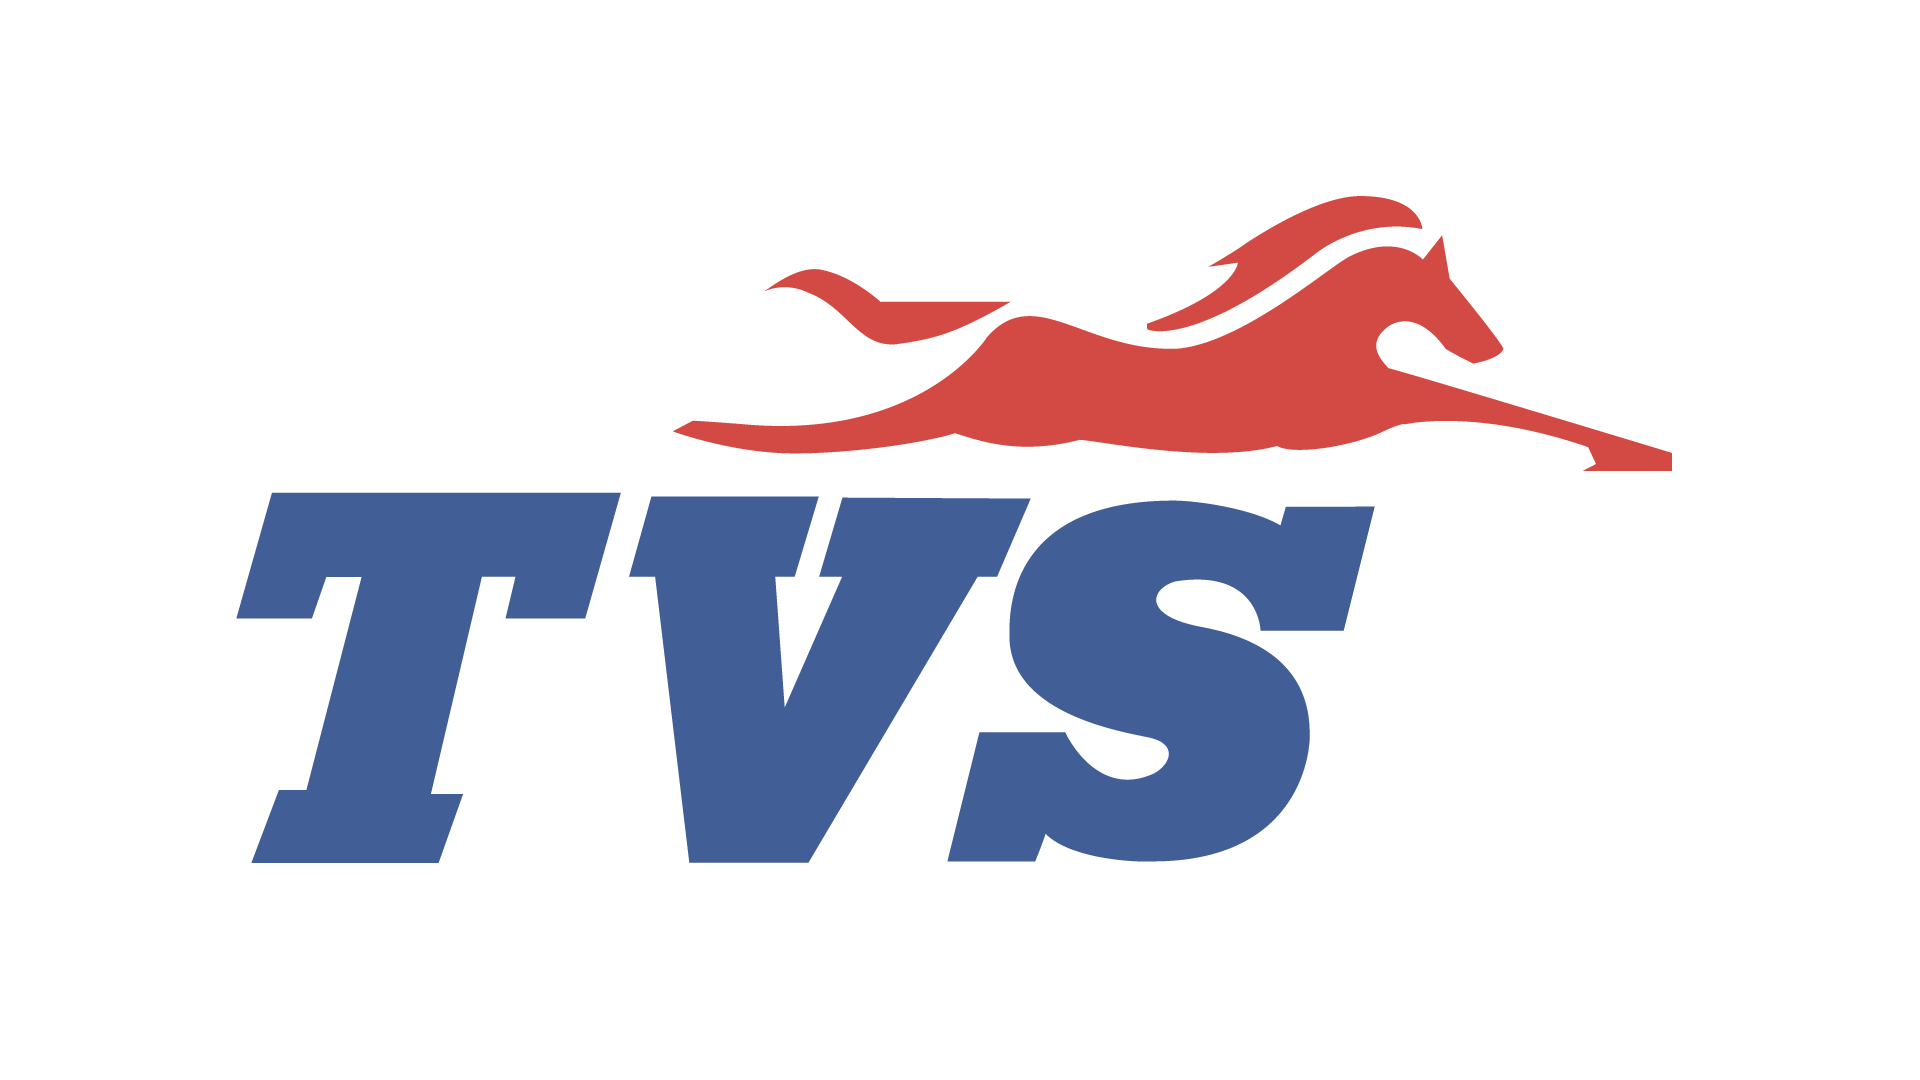 tvs motorcycle logo history and meaning, bike emblem